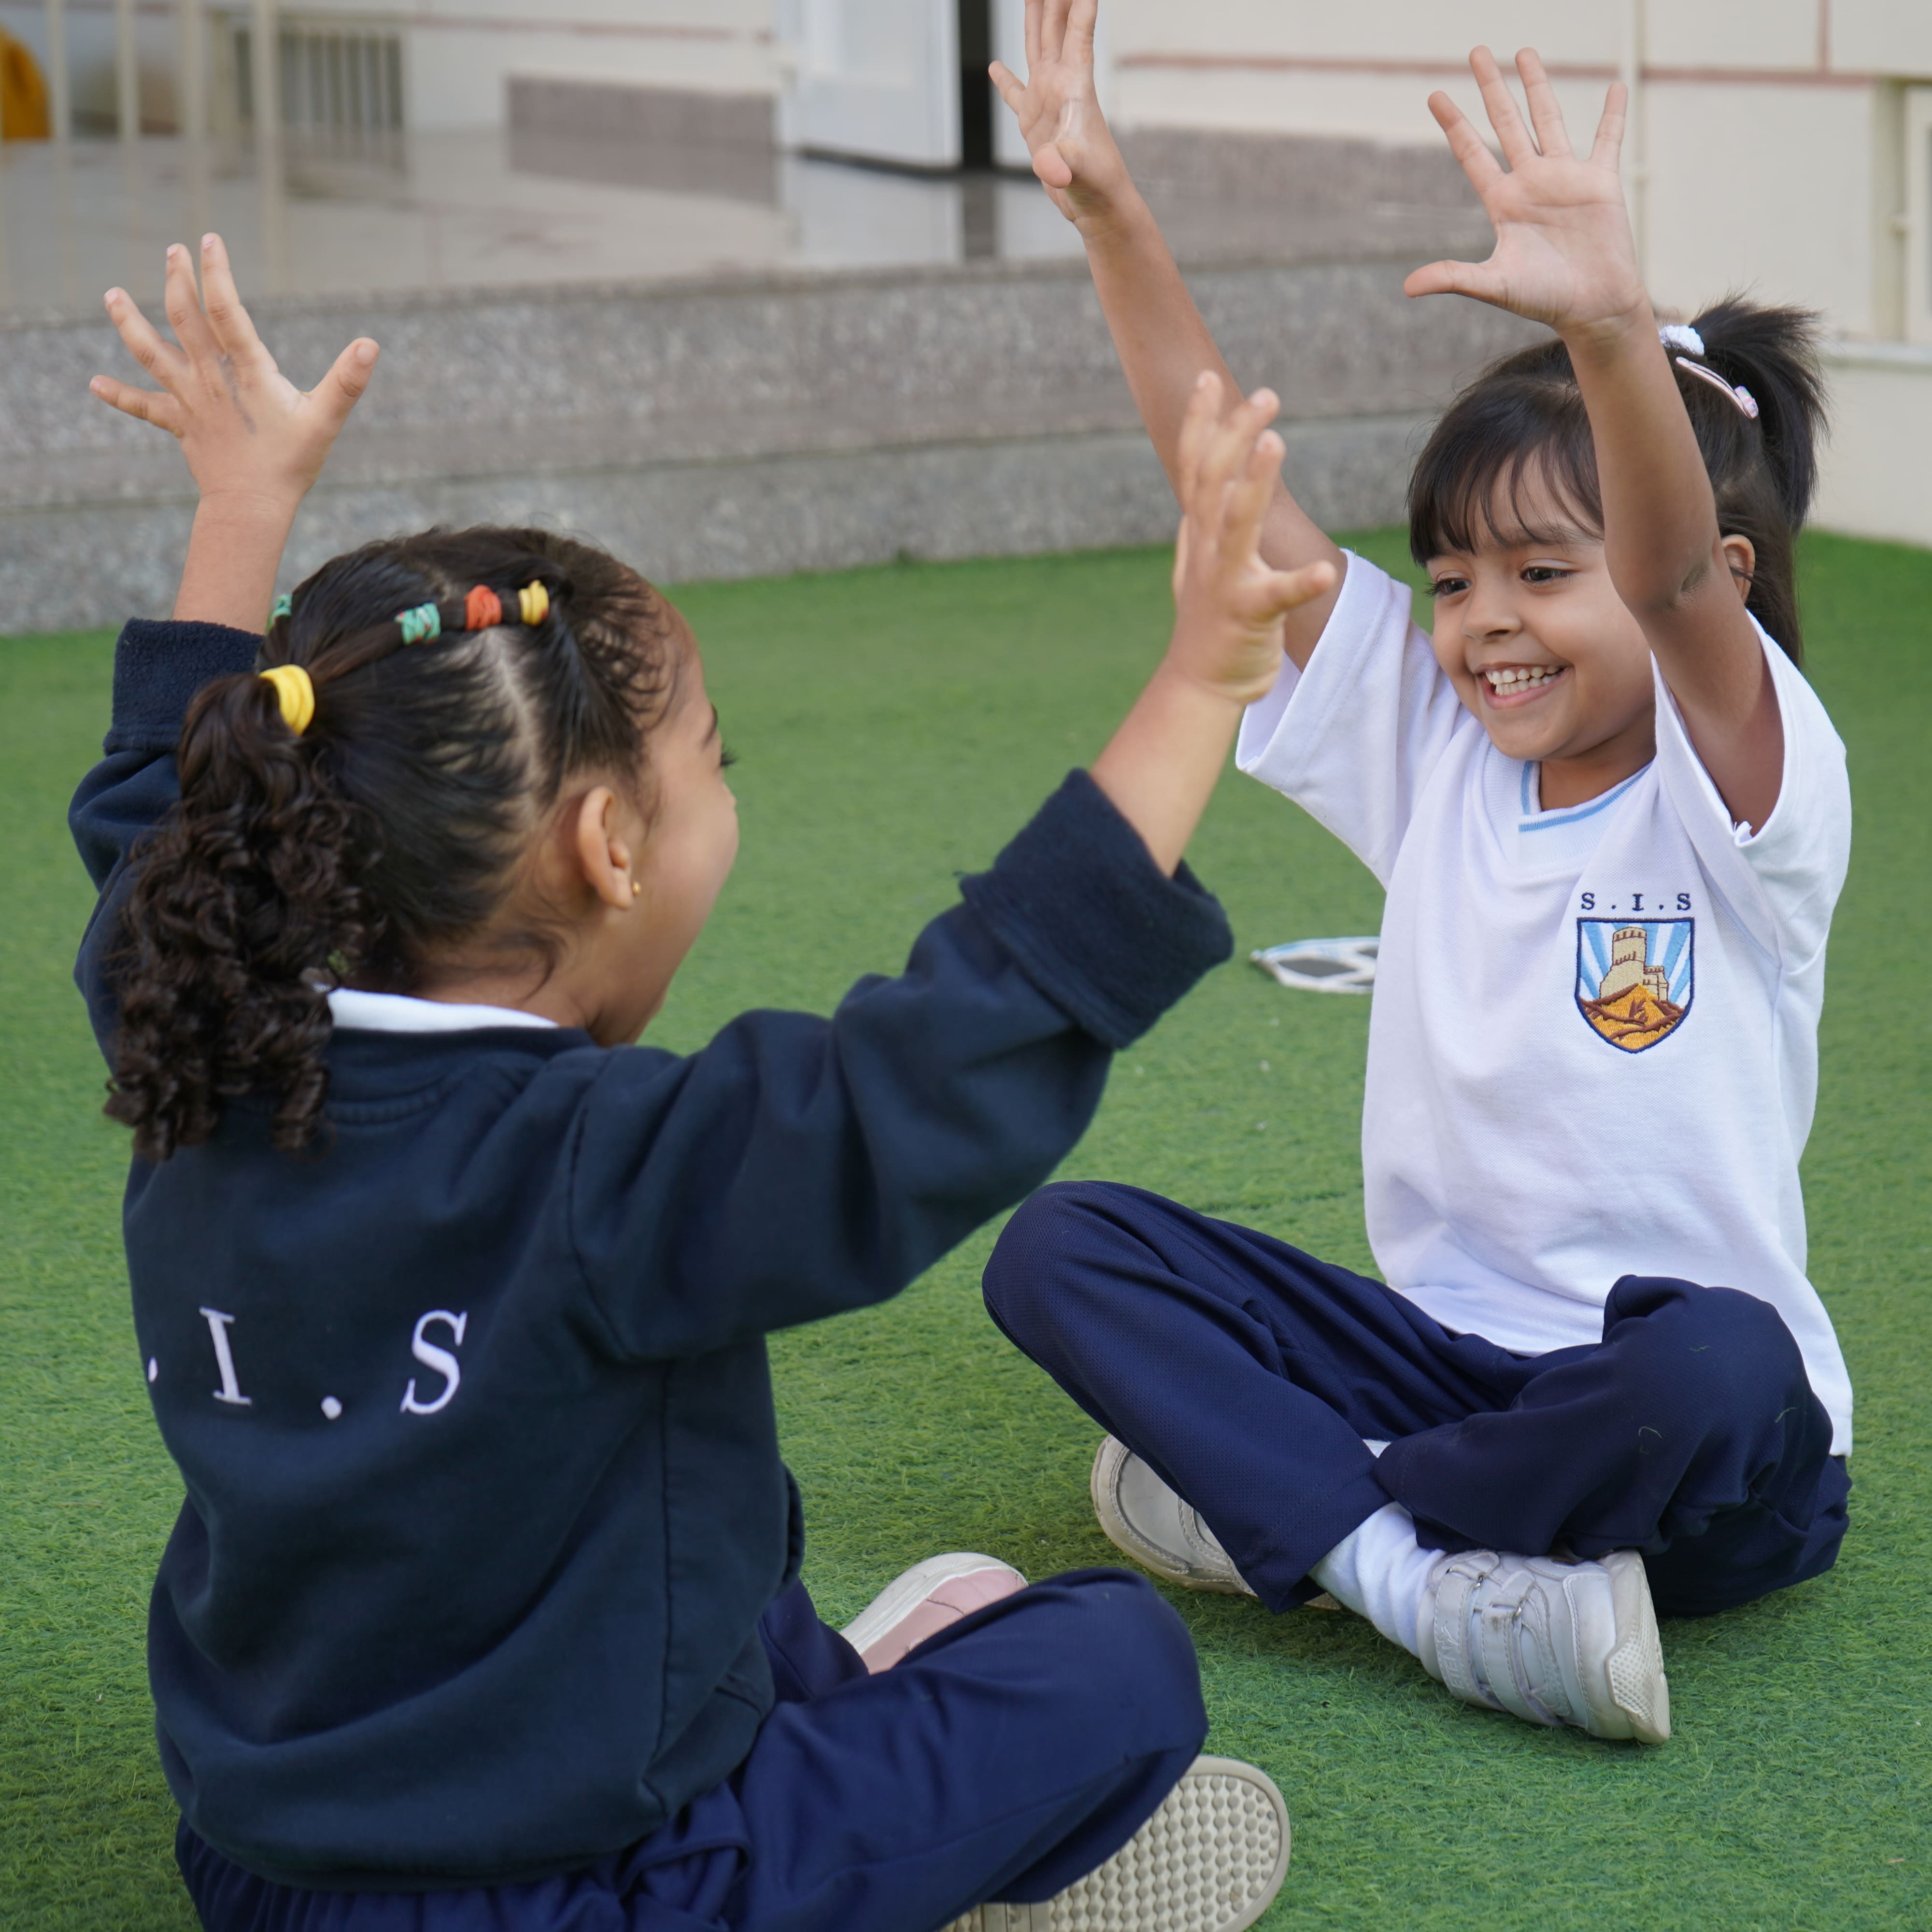 KG1 and KG2 an integrated program will cover the 7 areas of learning and development identified in the EYFS framework: